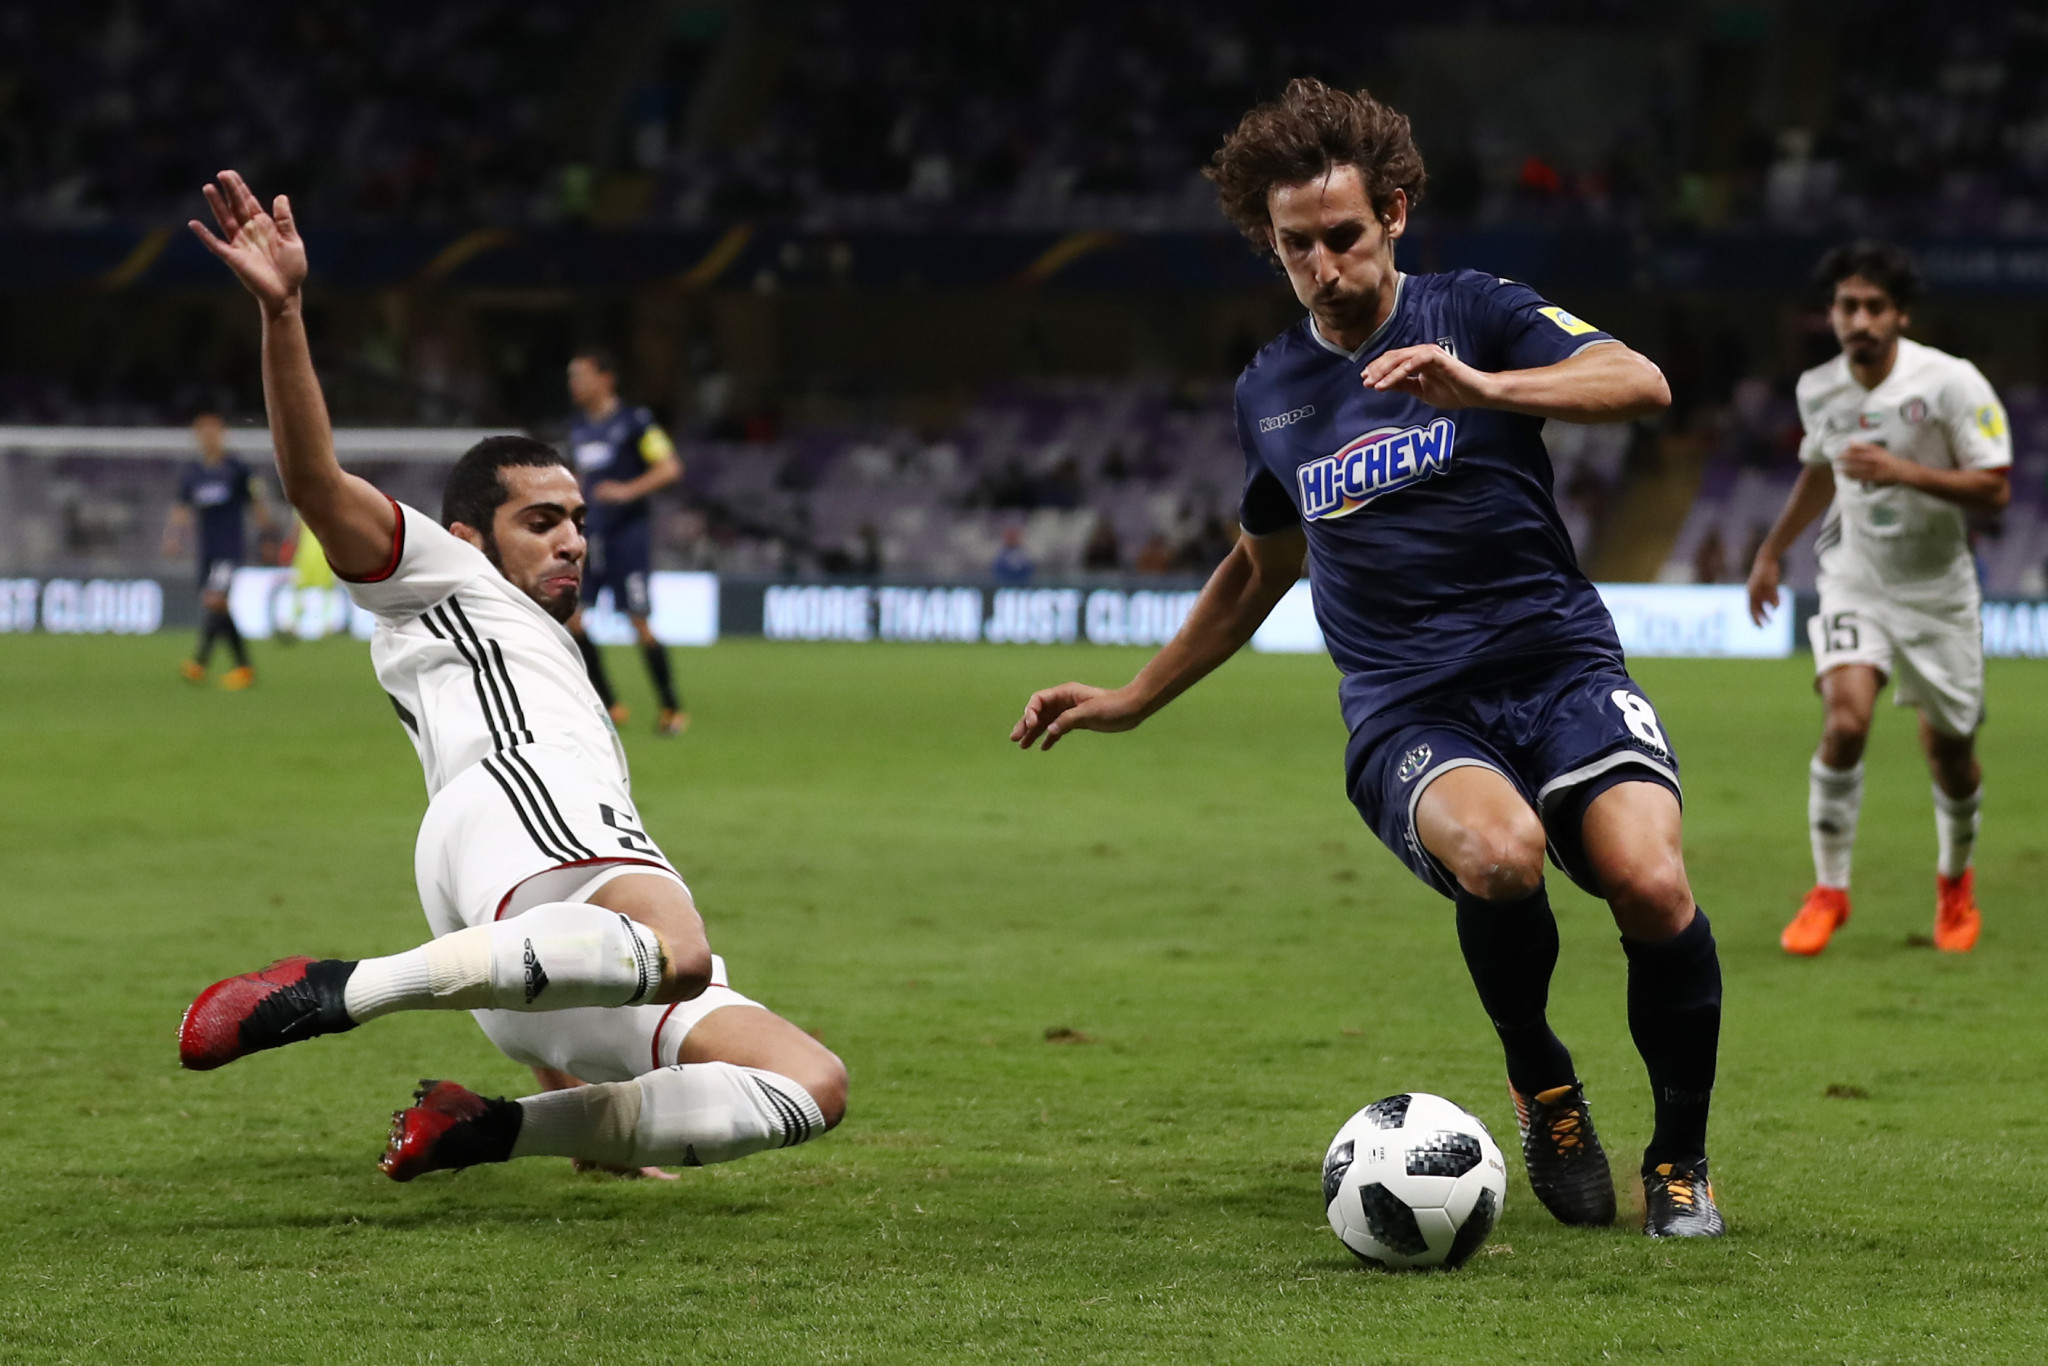 Auckland City's withdrawal from the delayed FIFA Club World Cup, due to start in Doha on February 4, means only six teams will be involved ©Getty Images